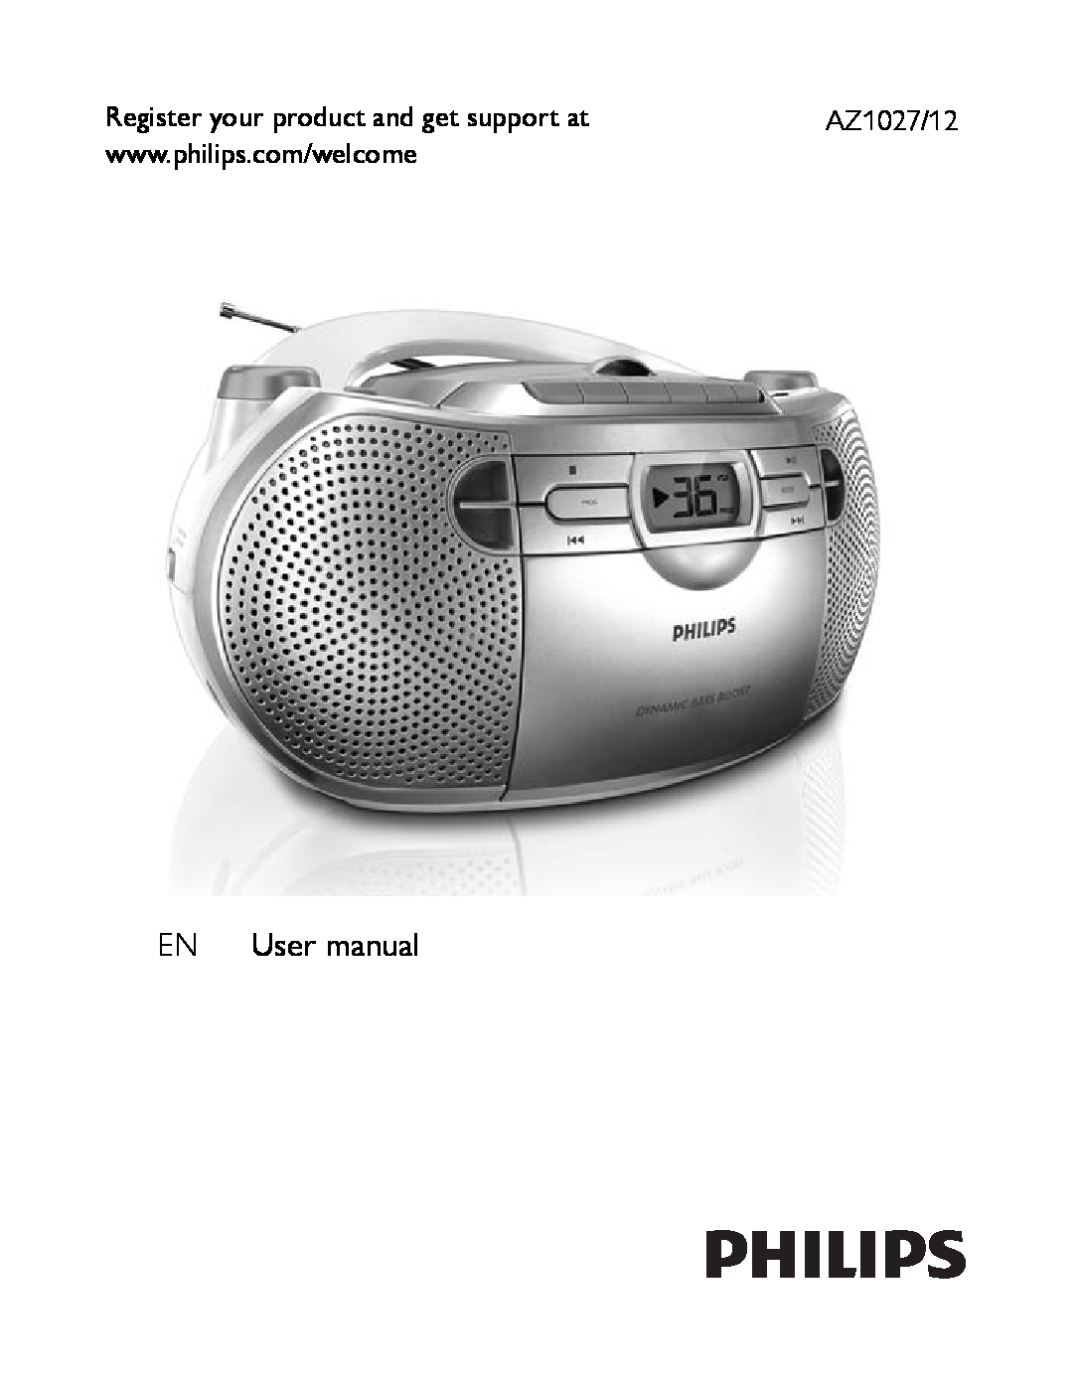 Philips AZ1027/12 user manual Register your product and get support at 